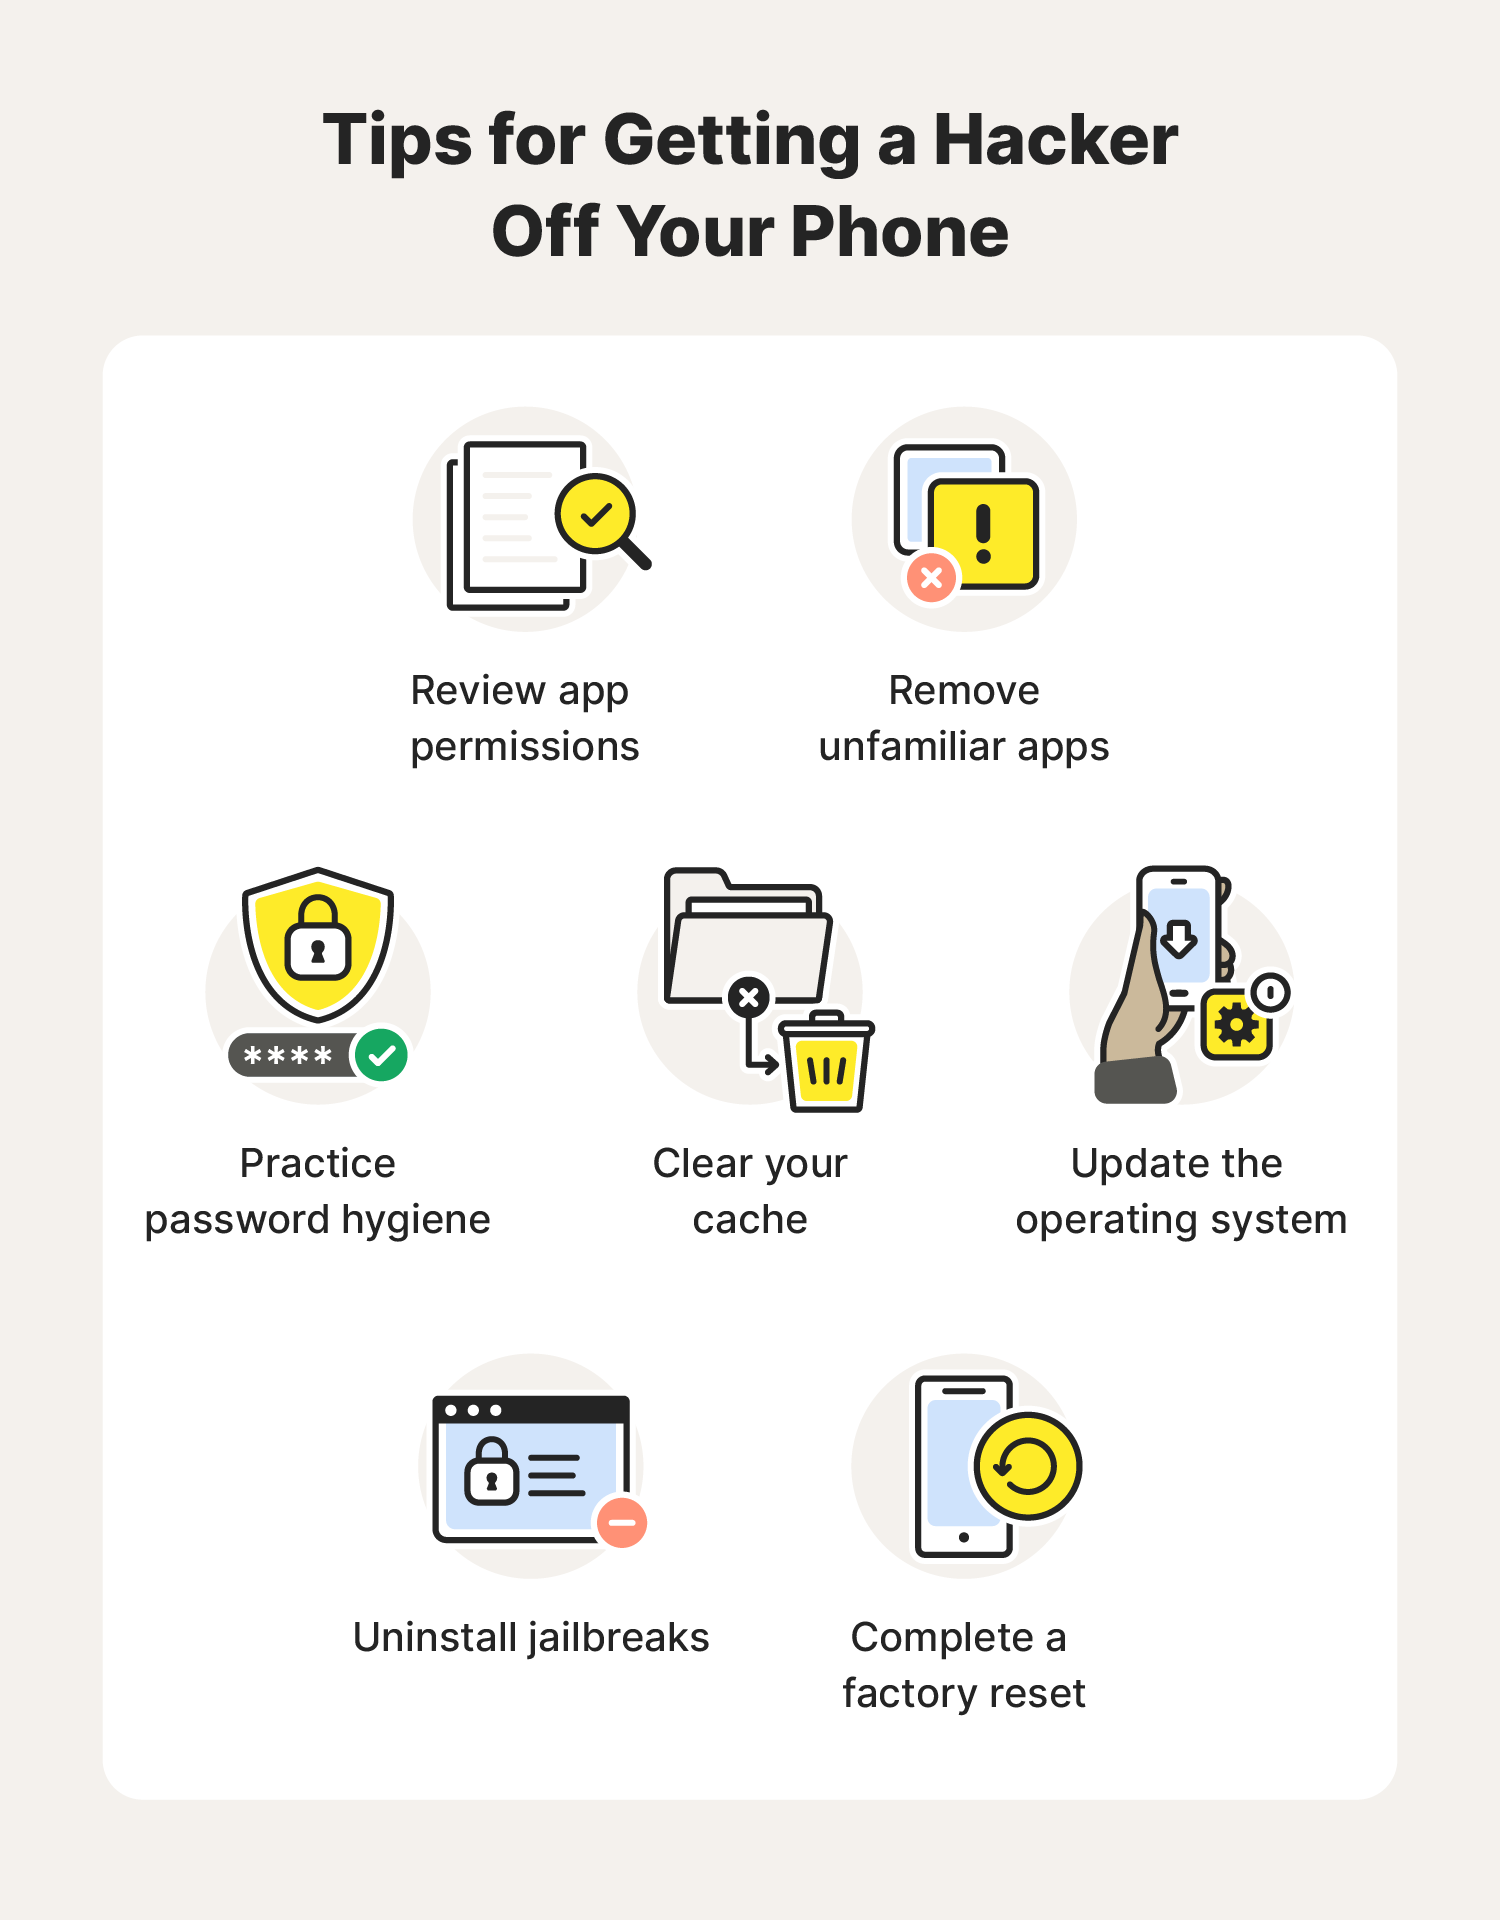 A graphic lists seven tips for getting a hacker off your phone that you would discover when researching “how to remove a hacker from my phone.”